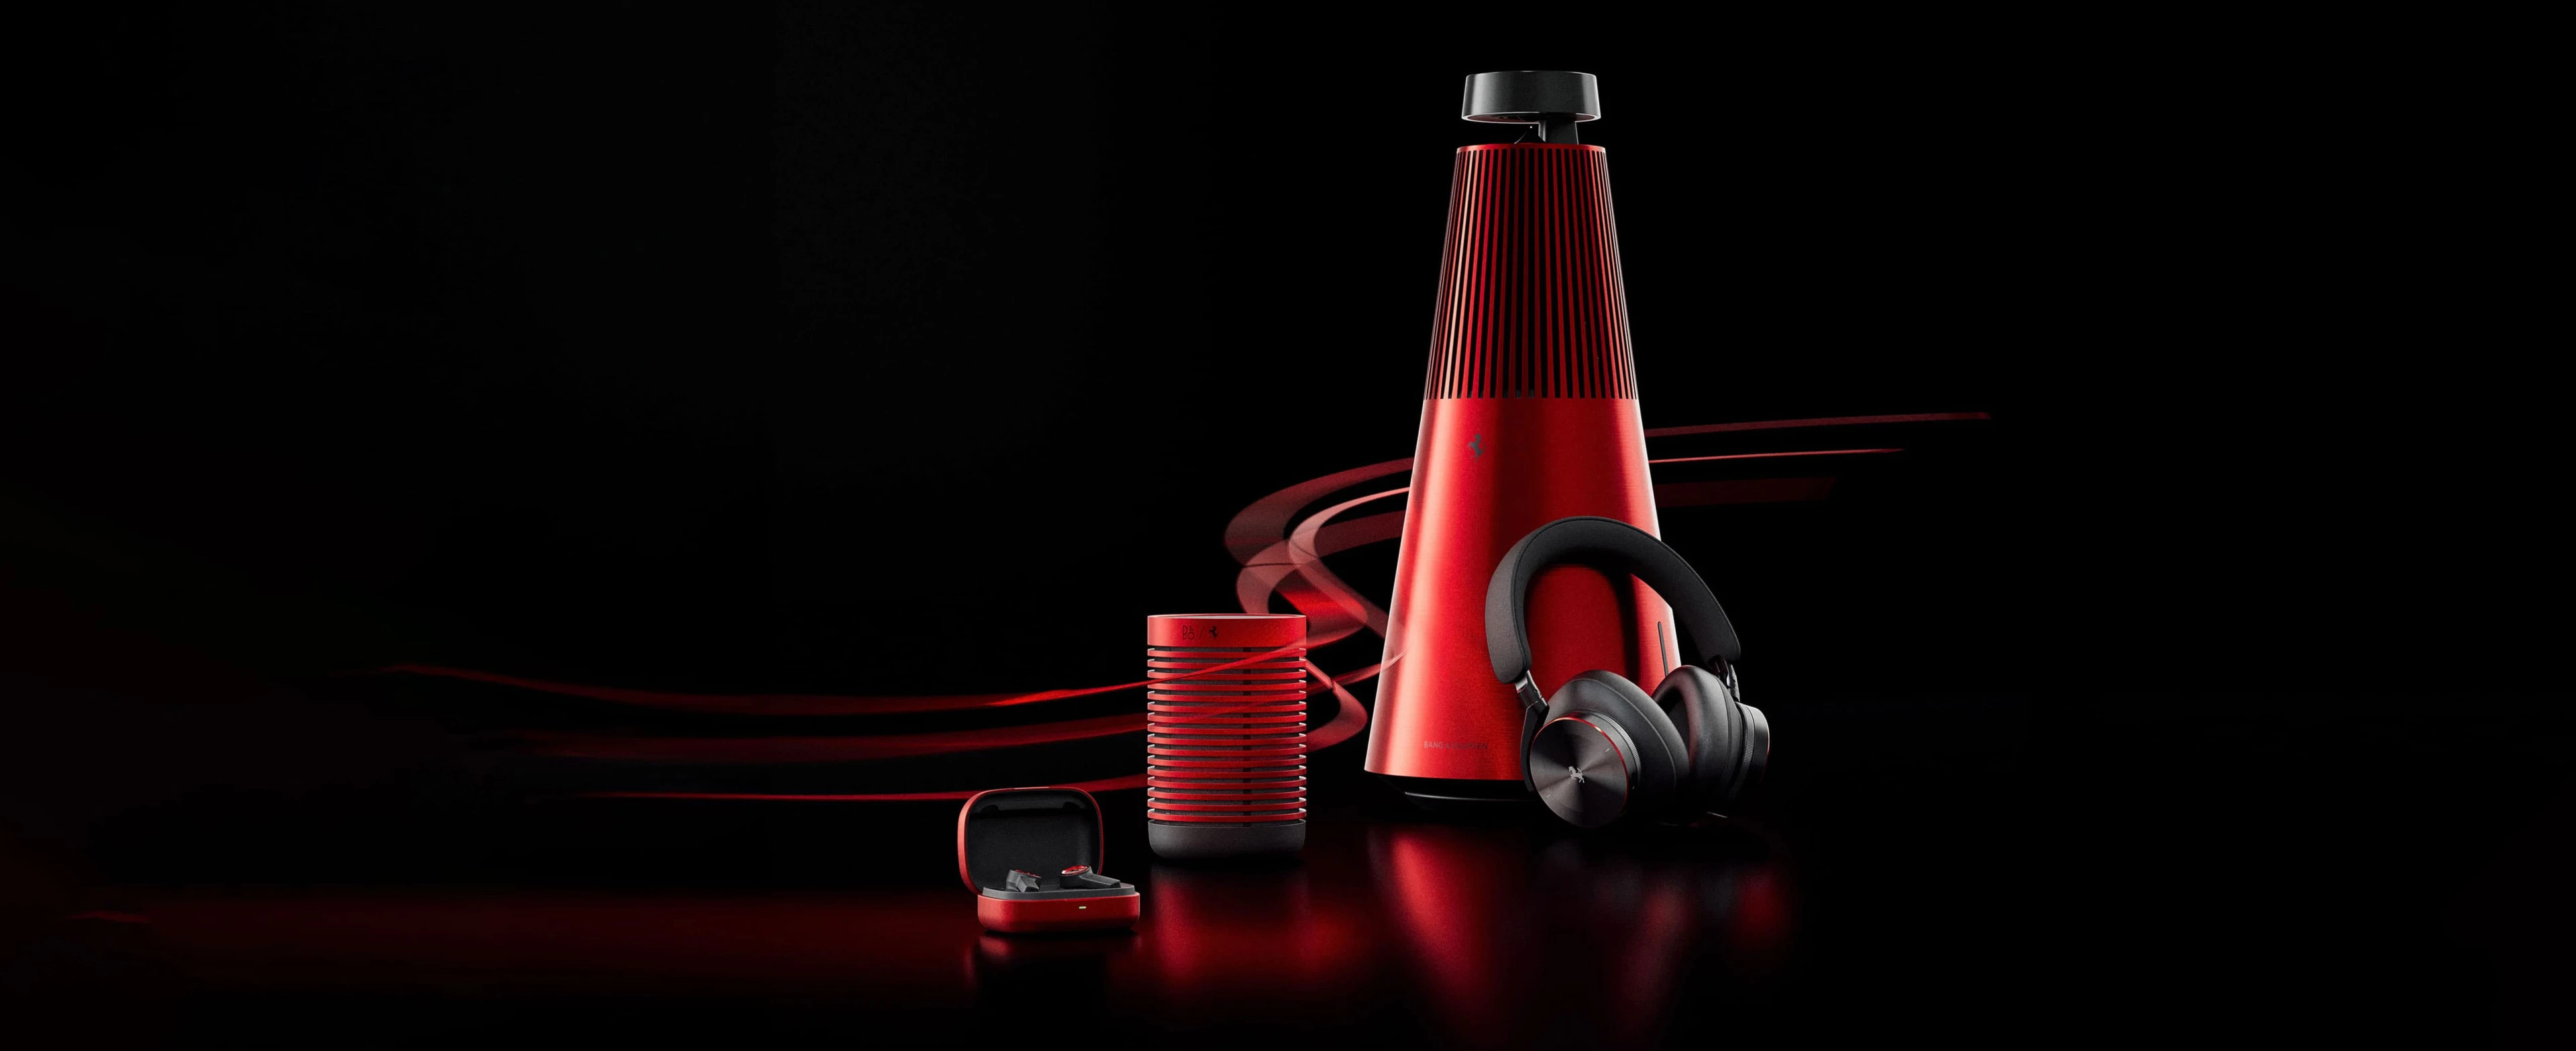 Image of the Bang & Olufsen Ferrari Collection with Beosound 2, Beosound Explore, Beoplay EX and Beoplay H95